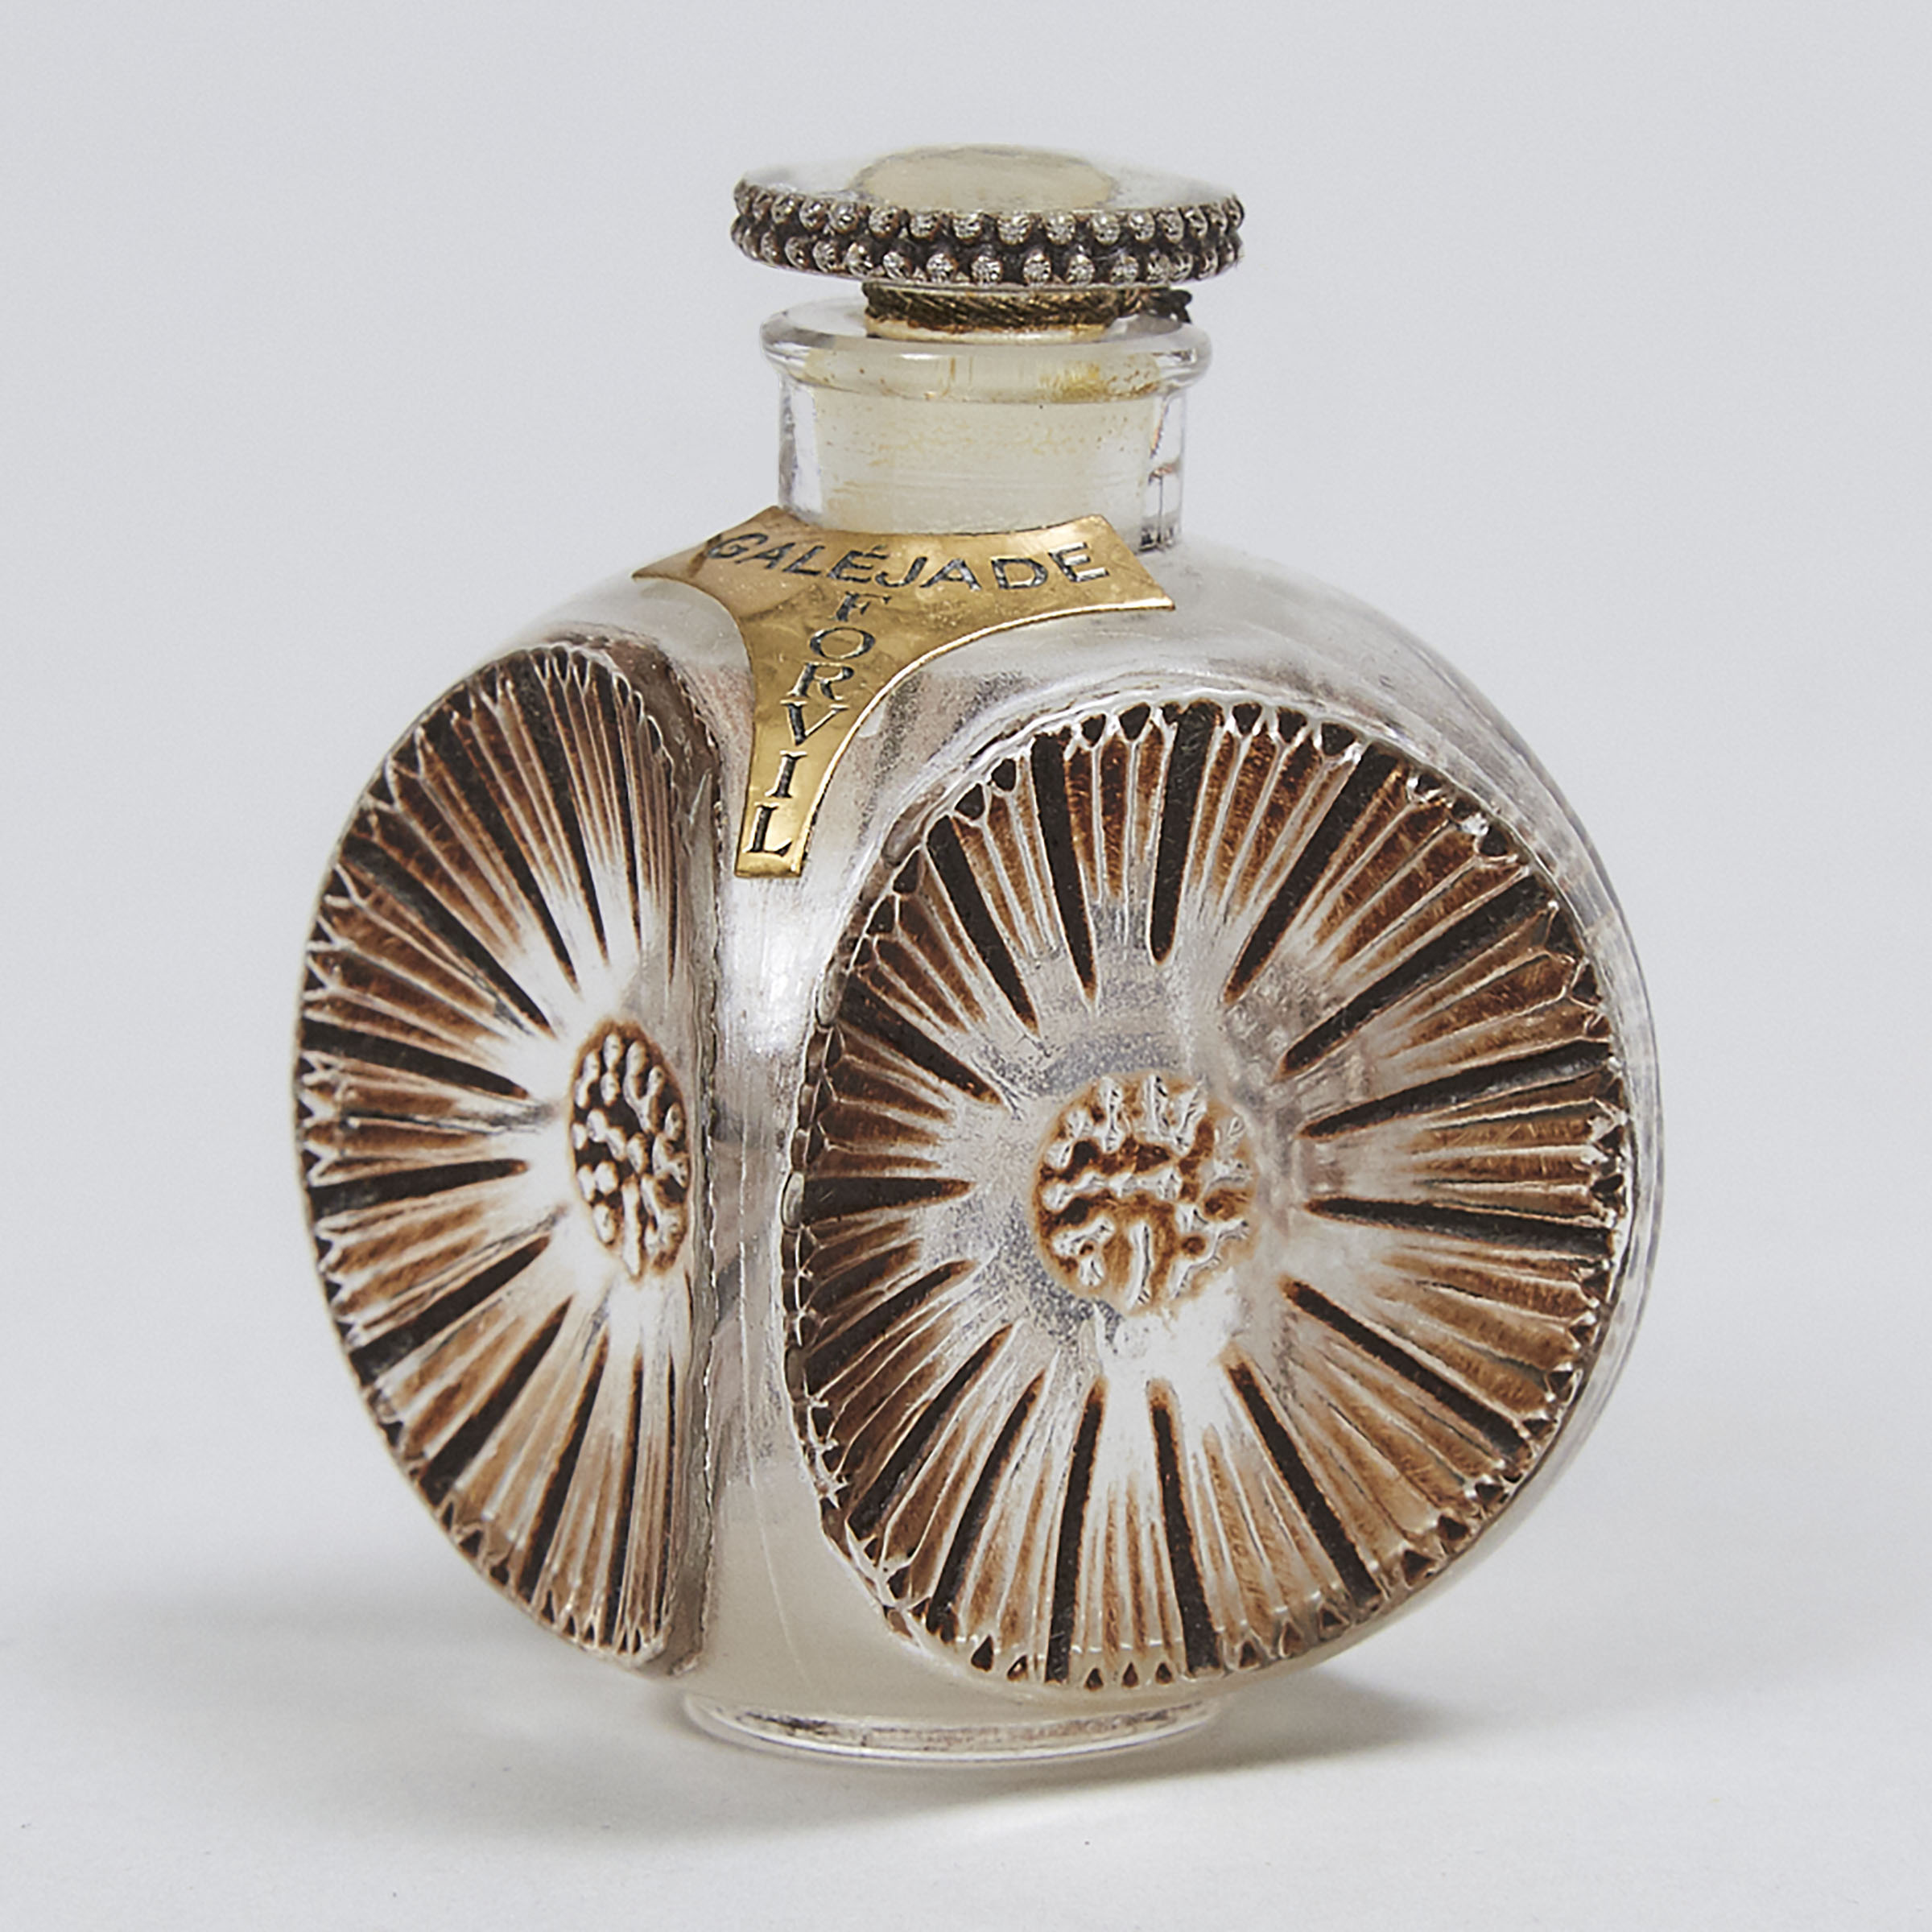 'Galéjade', Lalique Moulded and Stained Brown Enameled Glass Perfume Bottle, for Forvil, 1920s